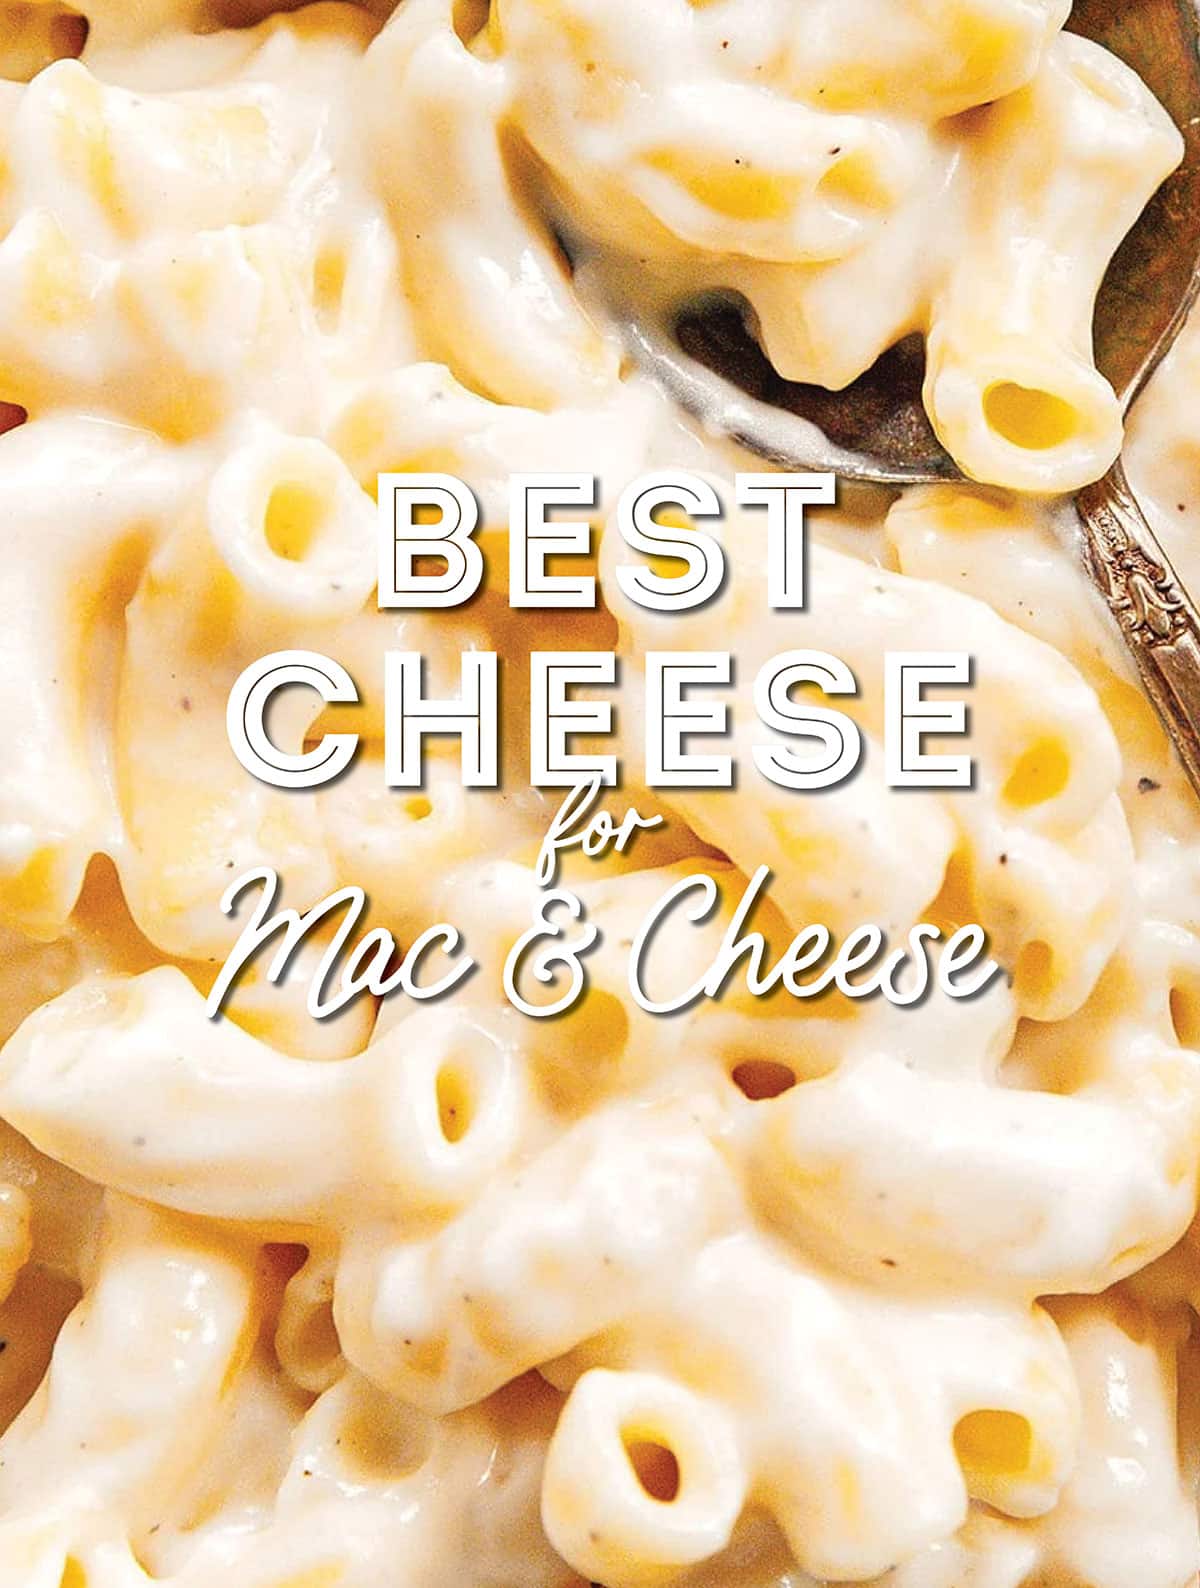 Collage that says "best cheese for mac and cheese".